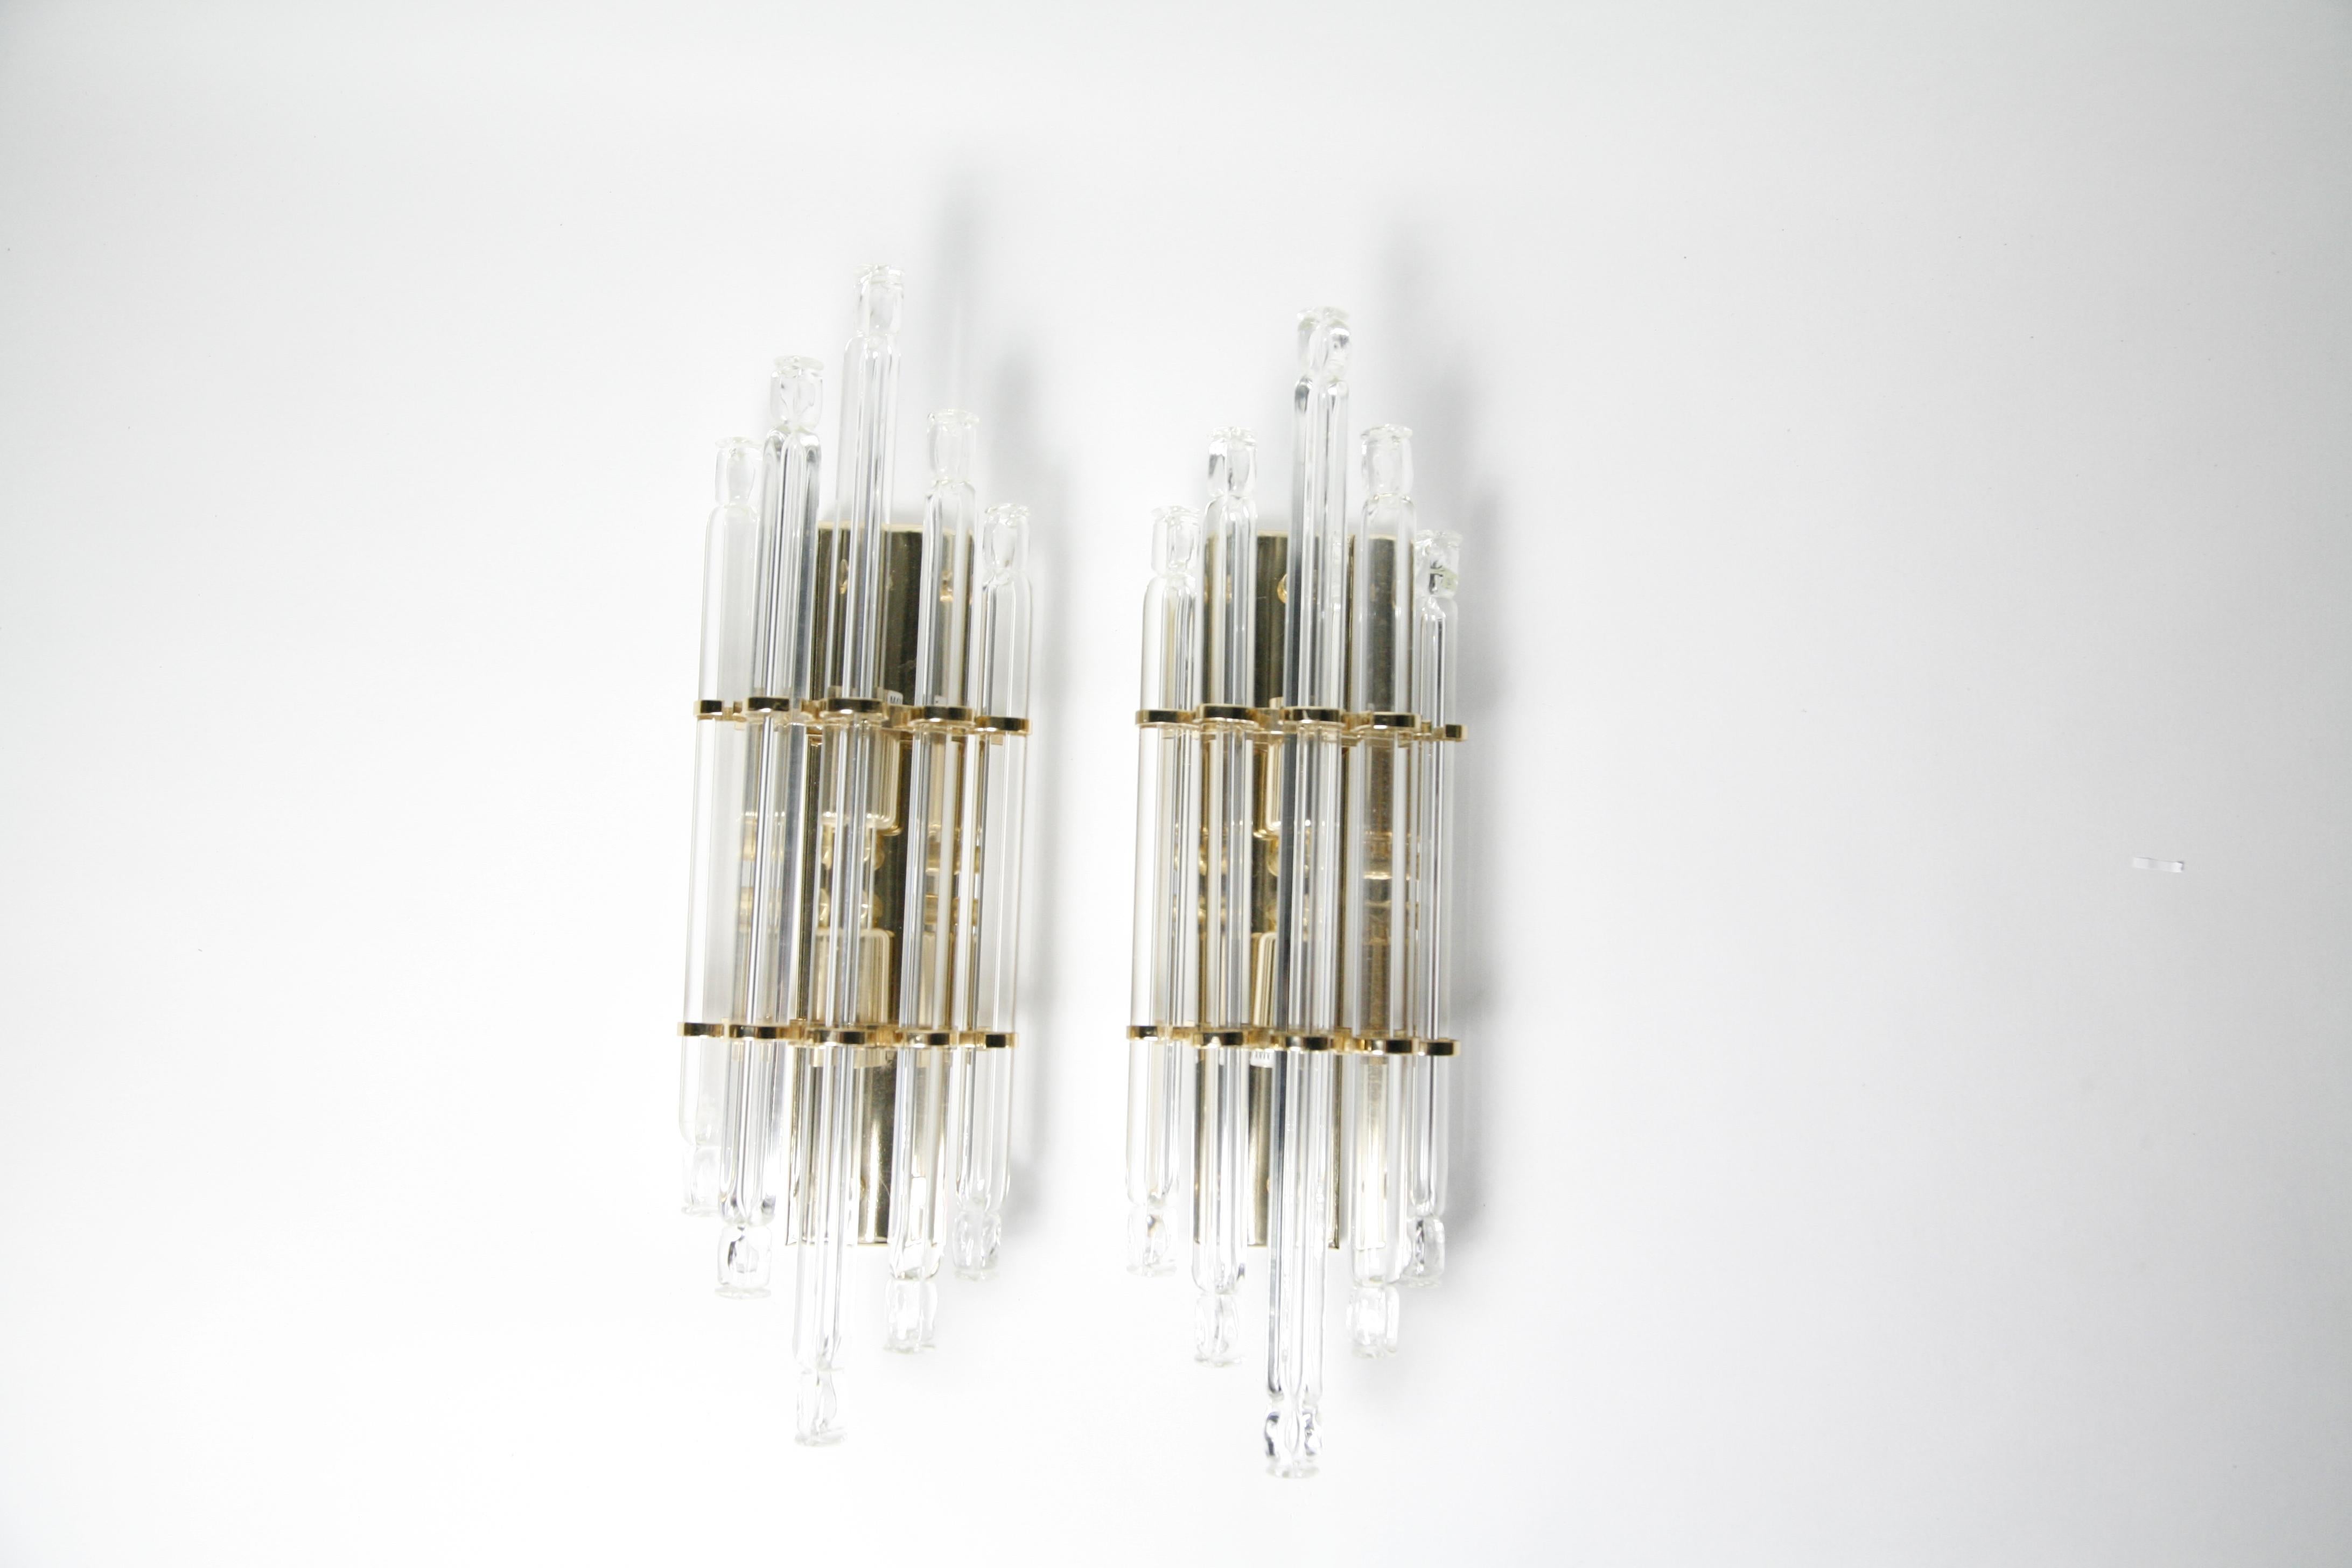 Pair of Kowatz leuchten sconces Germany, 1980, consisting of gilded frames with 5 individual crystal glass rods as a shade, elegant look.
Nicely detailed with tiny gold turn switch.
Hold two candelabra bulbs each, rewired for the US.

Priced as